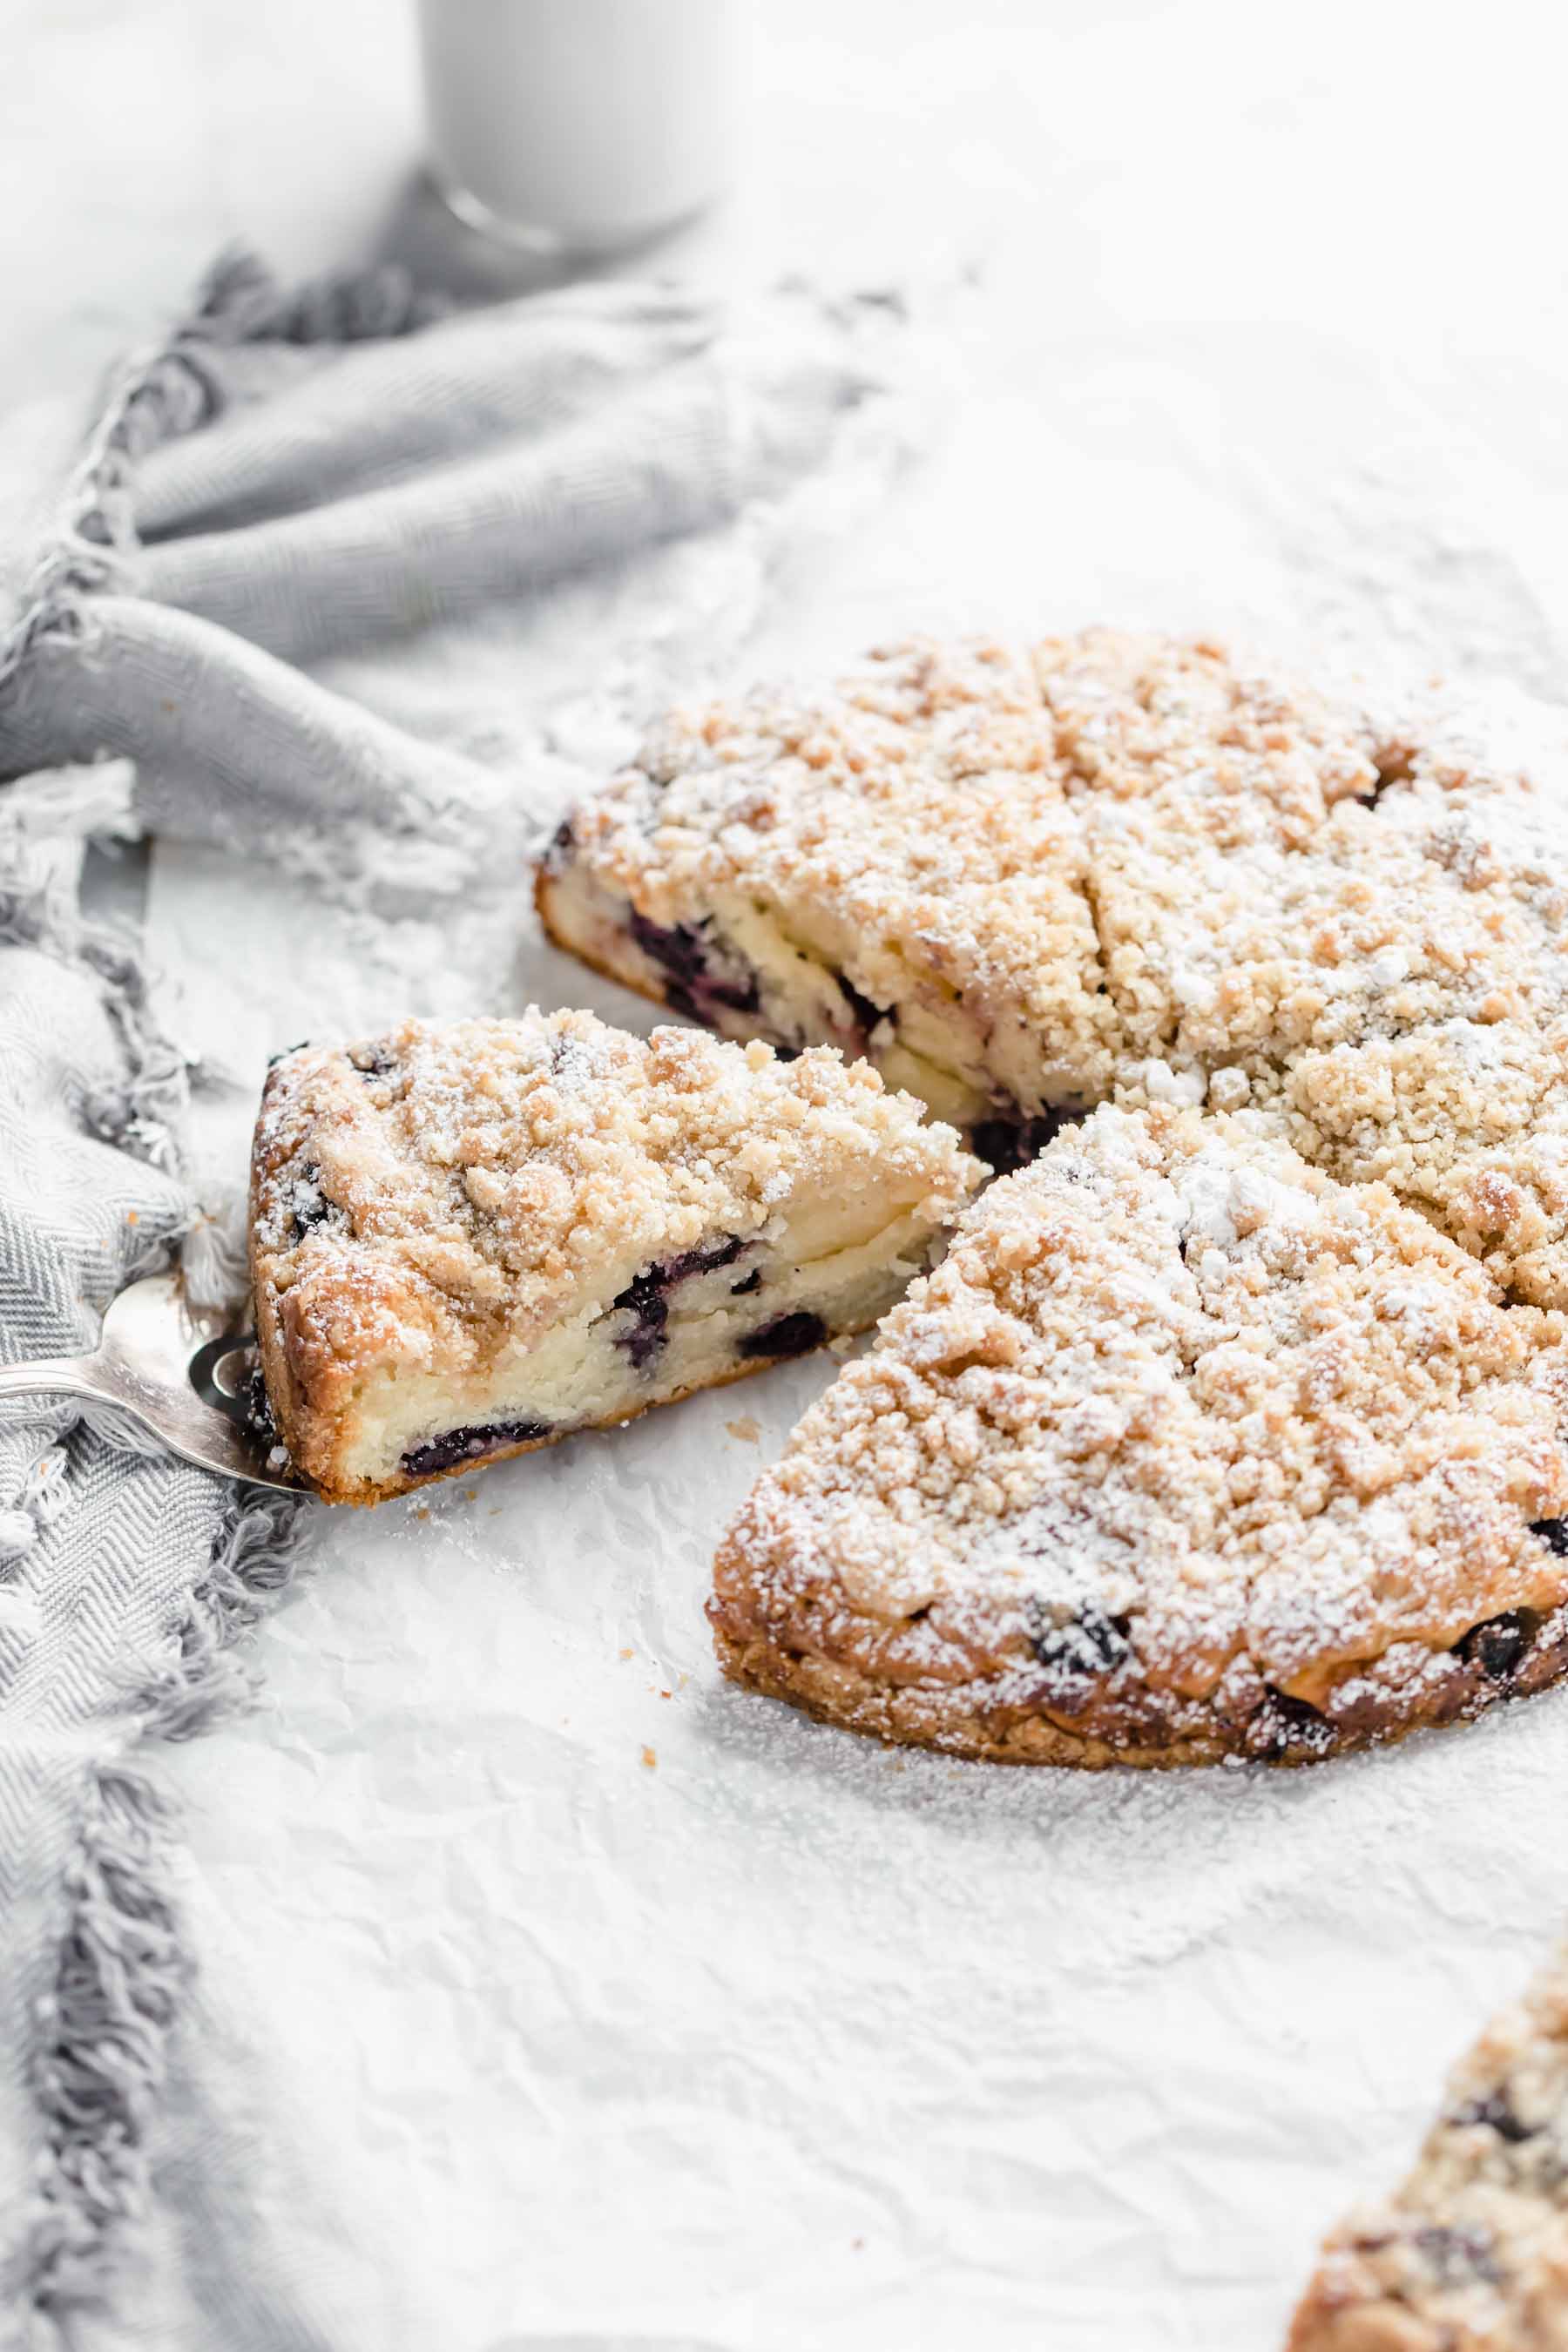 Blueberry scones with a decadent streusel topping. These blueberry streusel scones are perfect for mother's day!